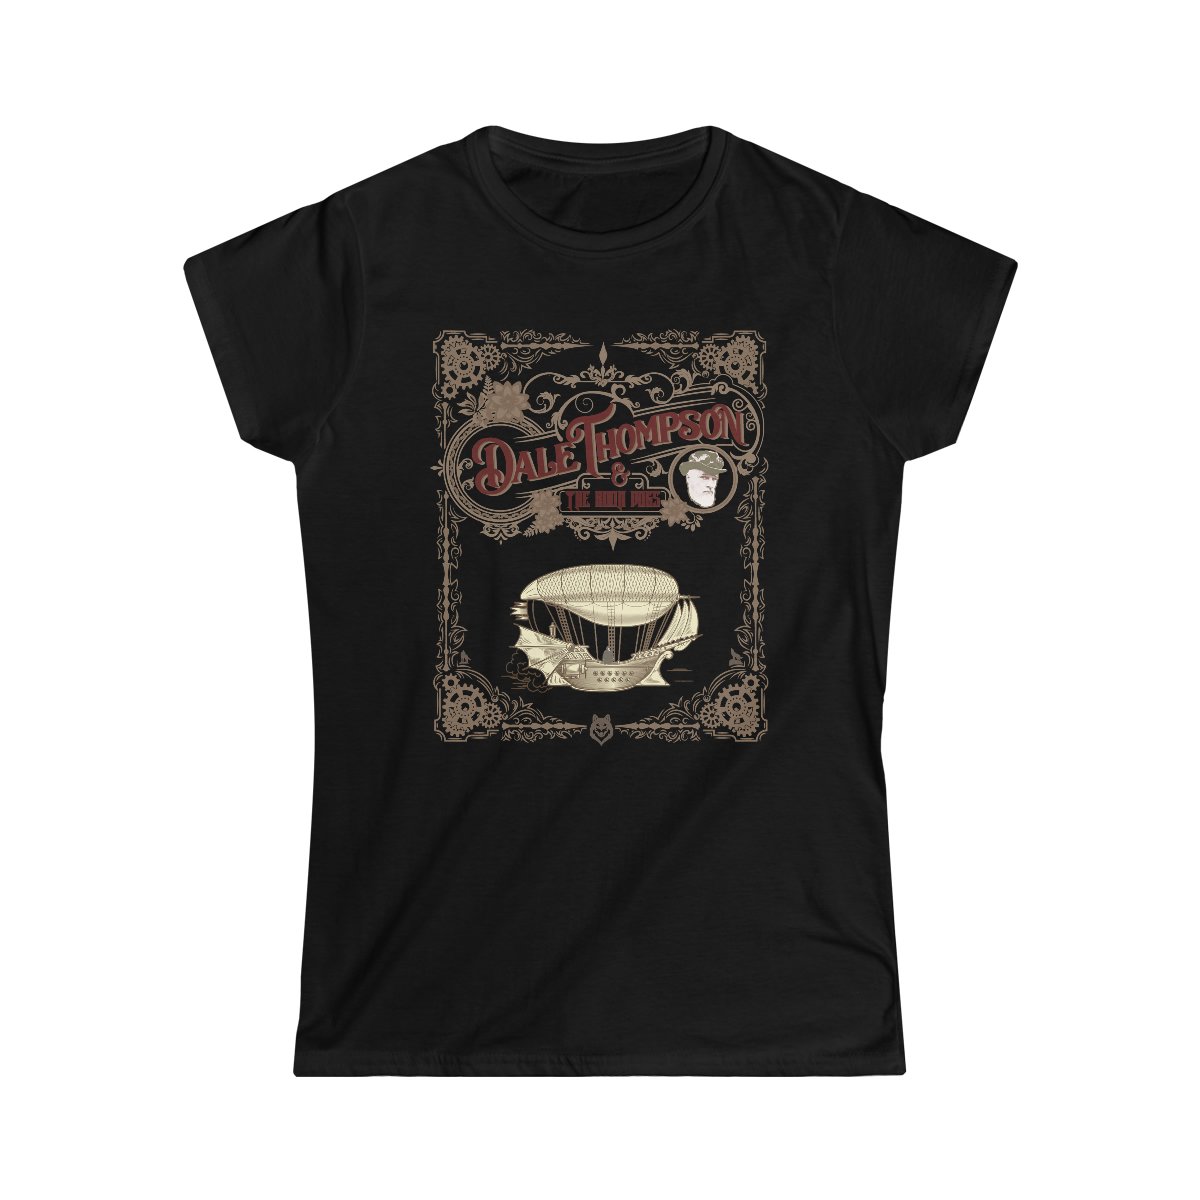 Dale Thompson and the Boon Dogs Women’s Short Sleeve Tshirt 640L